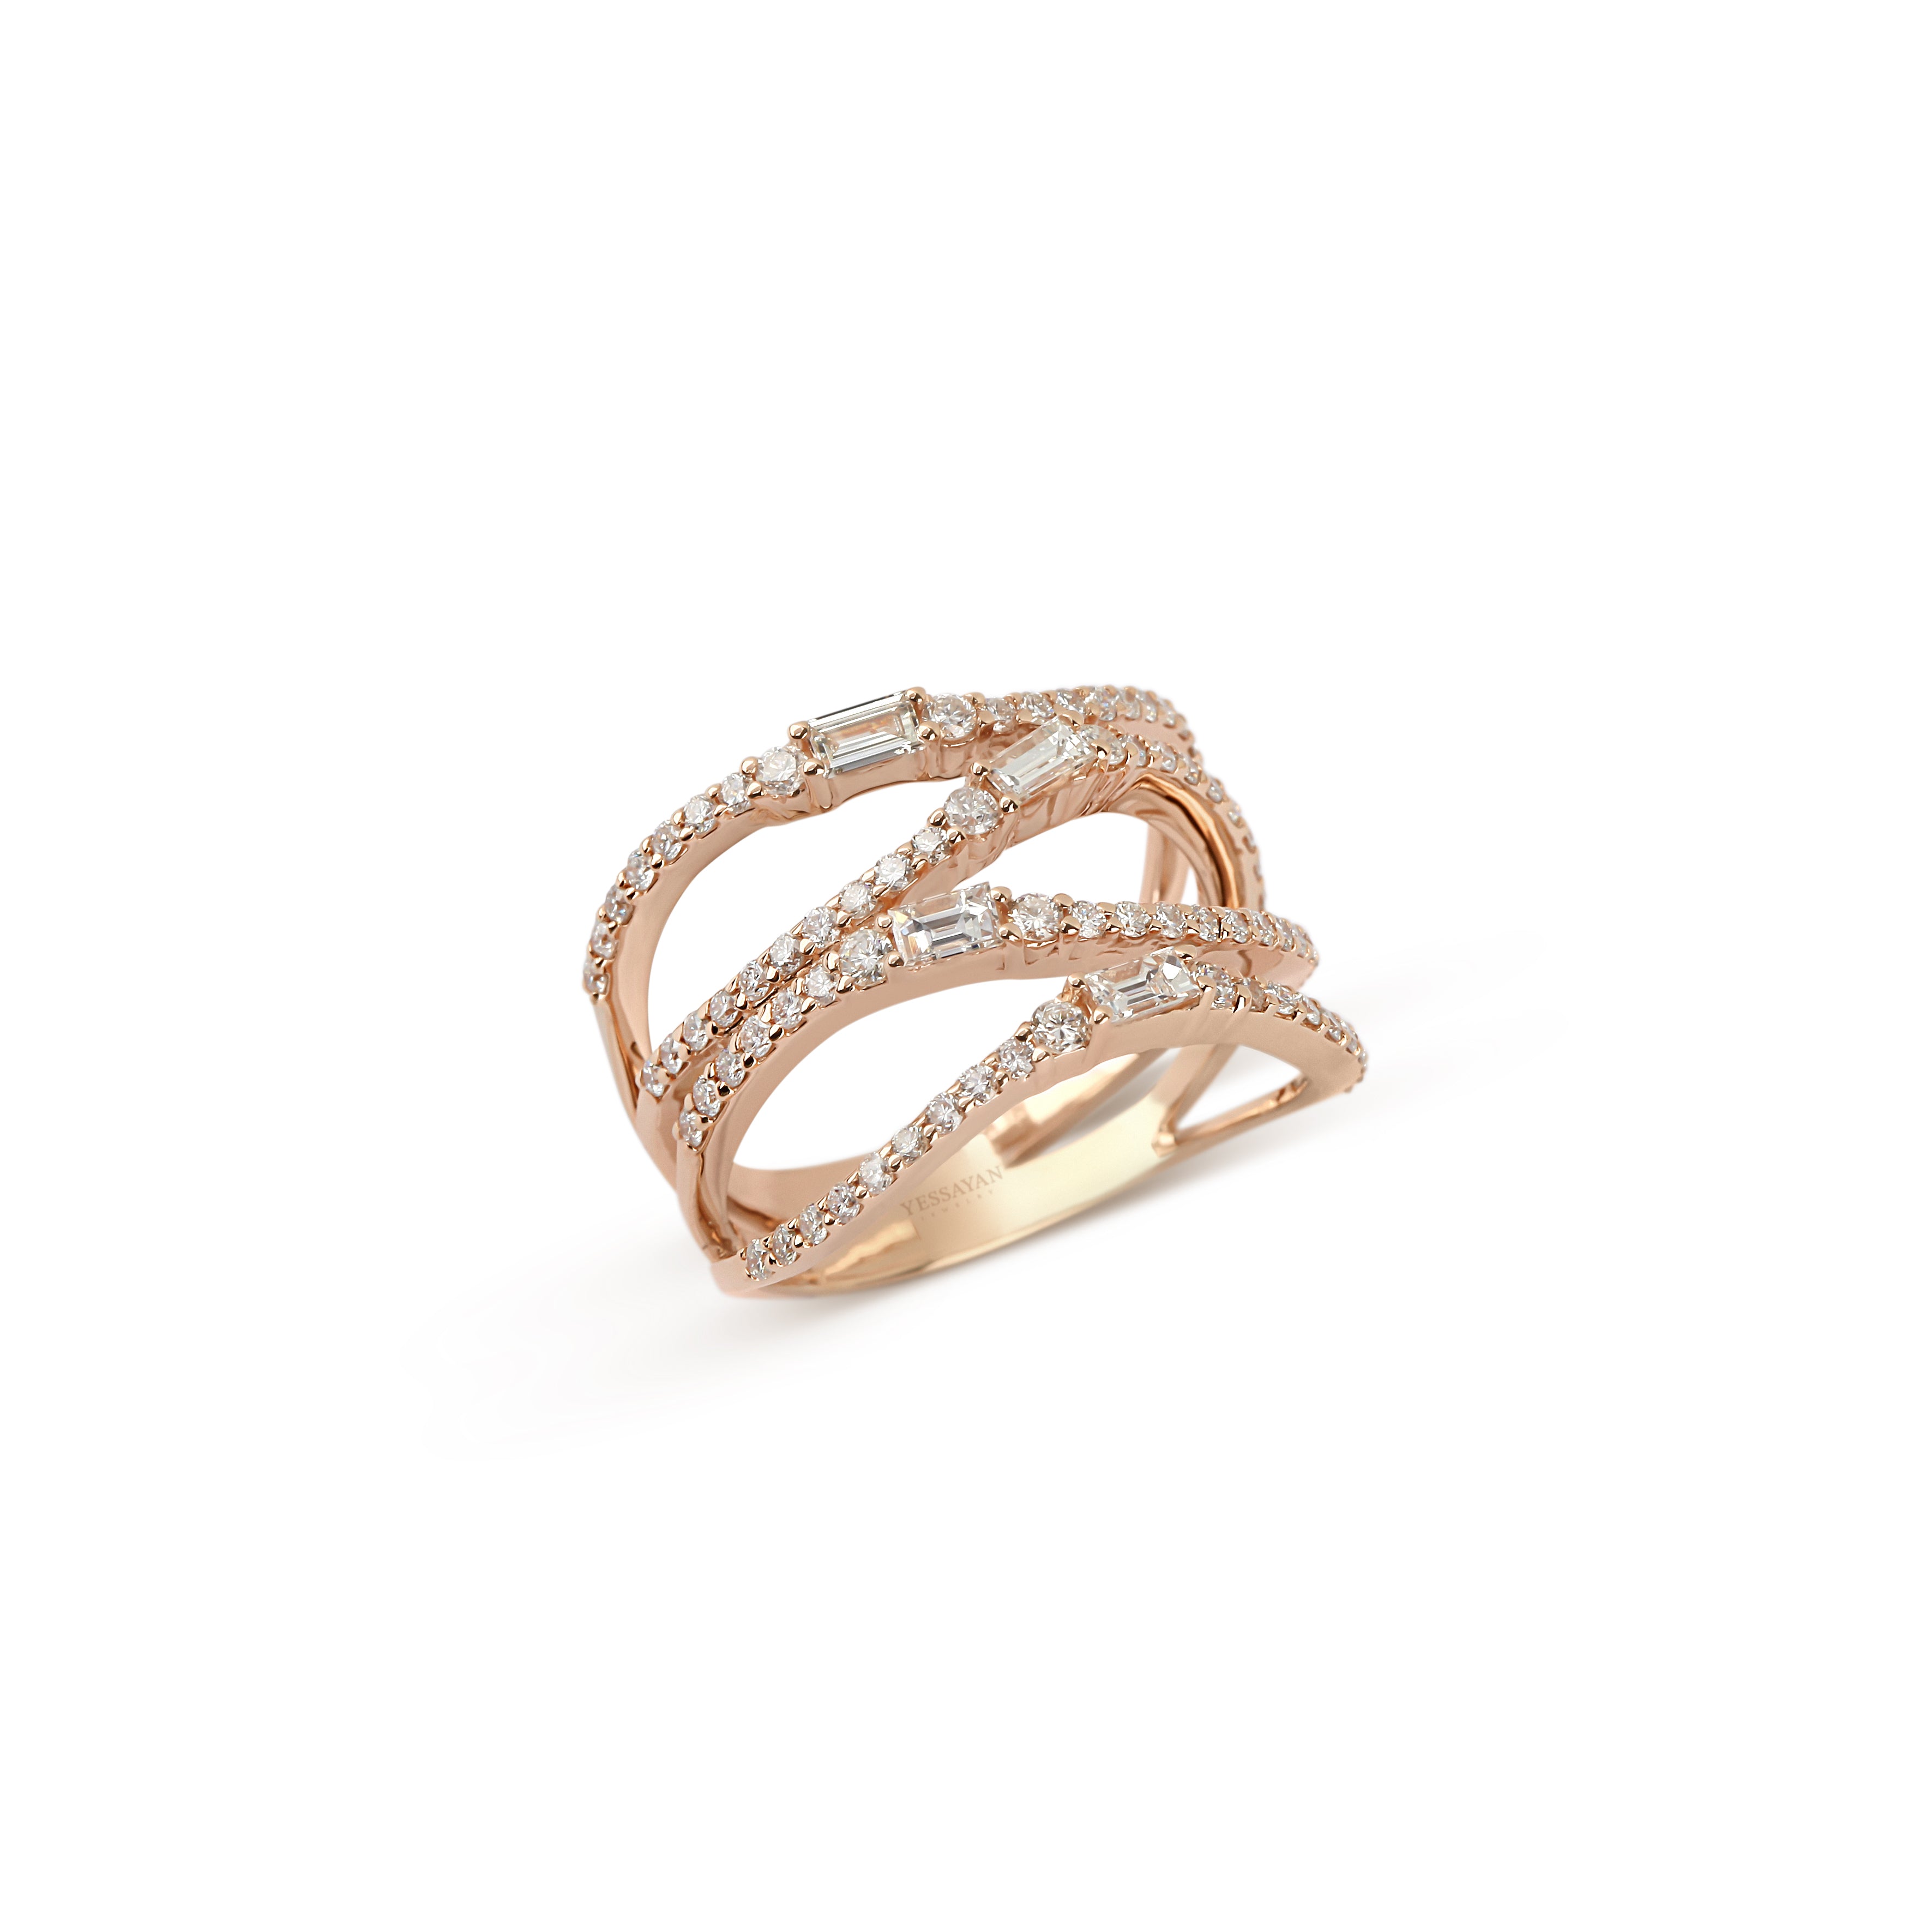 Rose Gold Baguette & Round Diamond Ring | Jewelry shops online | Wedding ring 